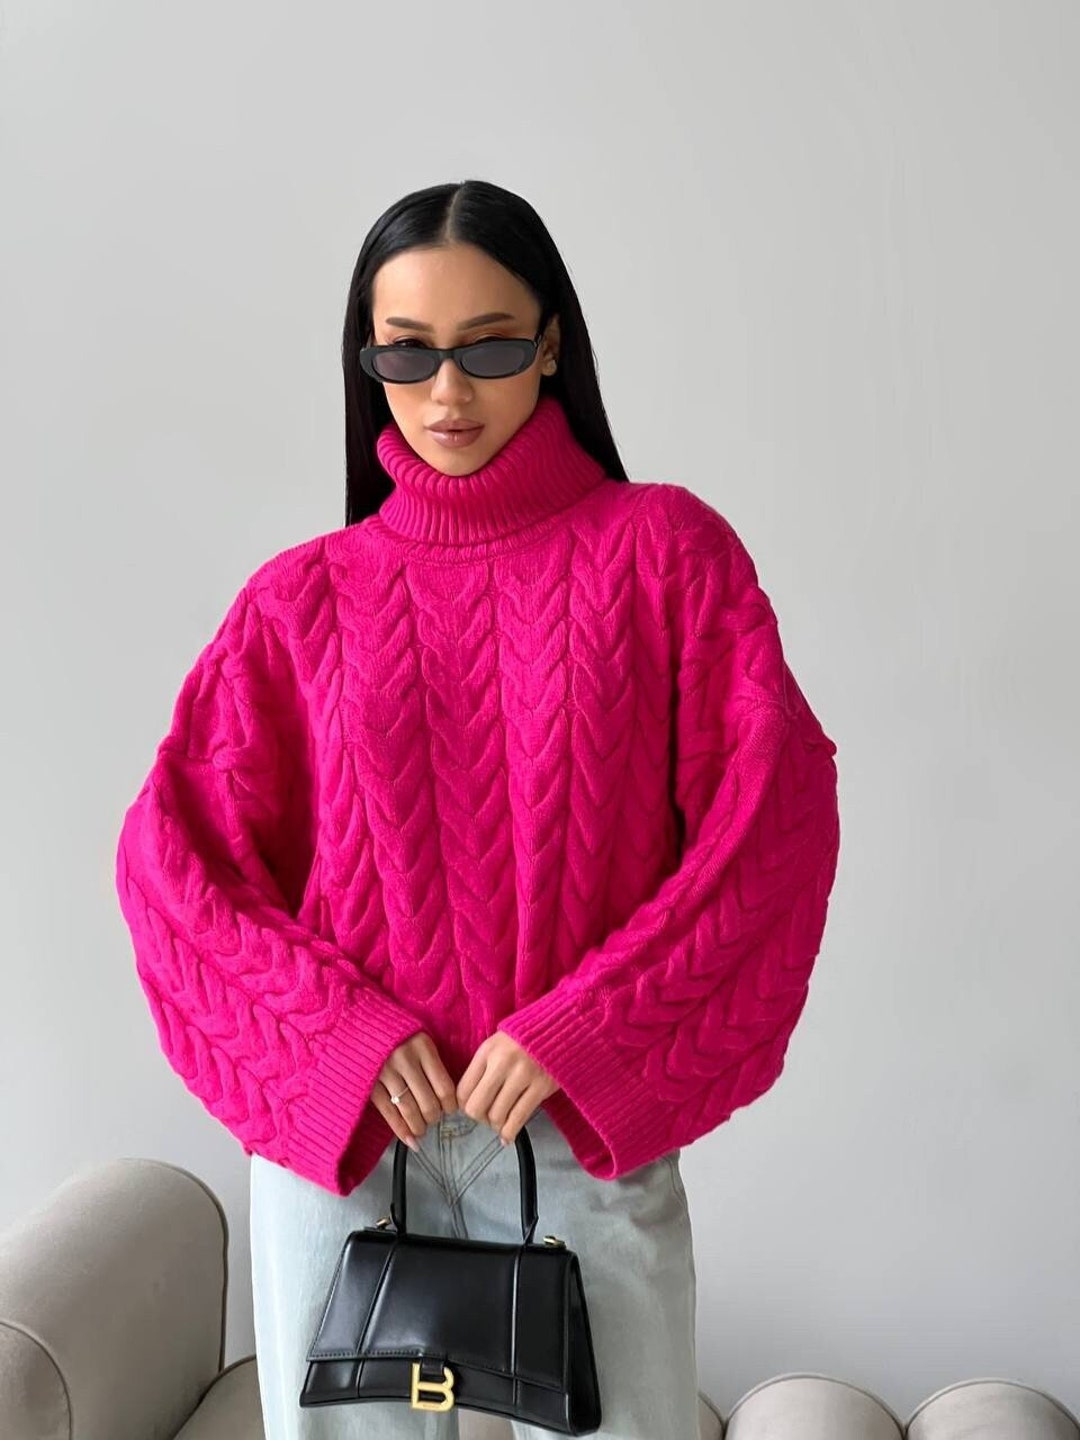  Elneeya Hot Pink Sweater for Women Turtleneck Cable Knit Loose  Fuzzy Knit Chunky Warm Pullover Sweater Top : Clothing, Shoes & Jewelry